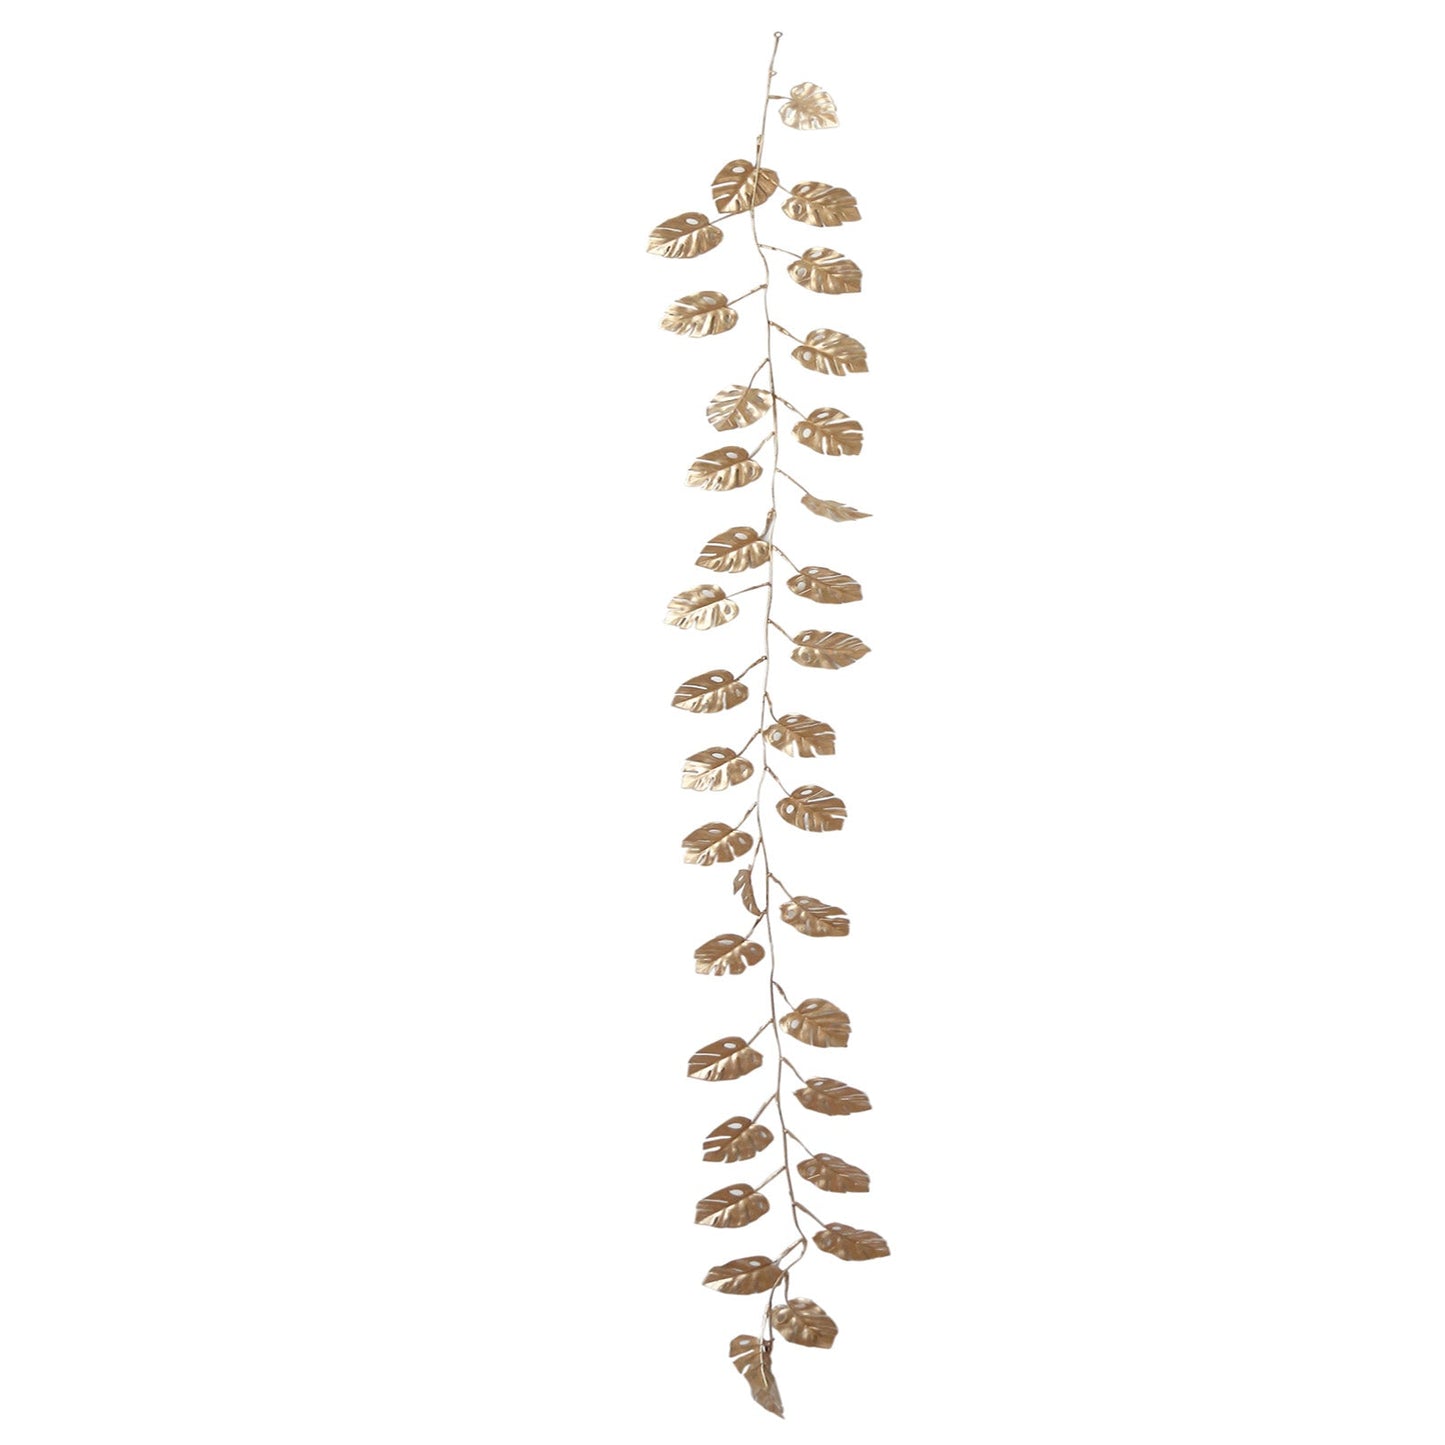 Metallic Gold Artificial Monstera Leaf Table Garland Plant, Faux Tropical Jungle Hanging Vine 7ft